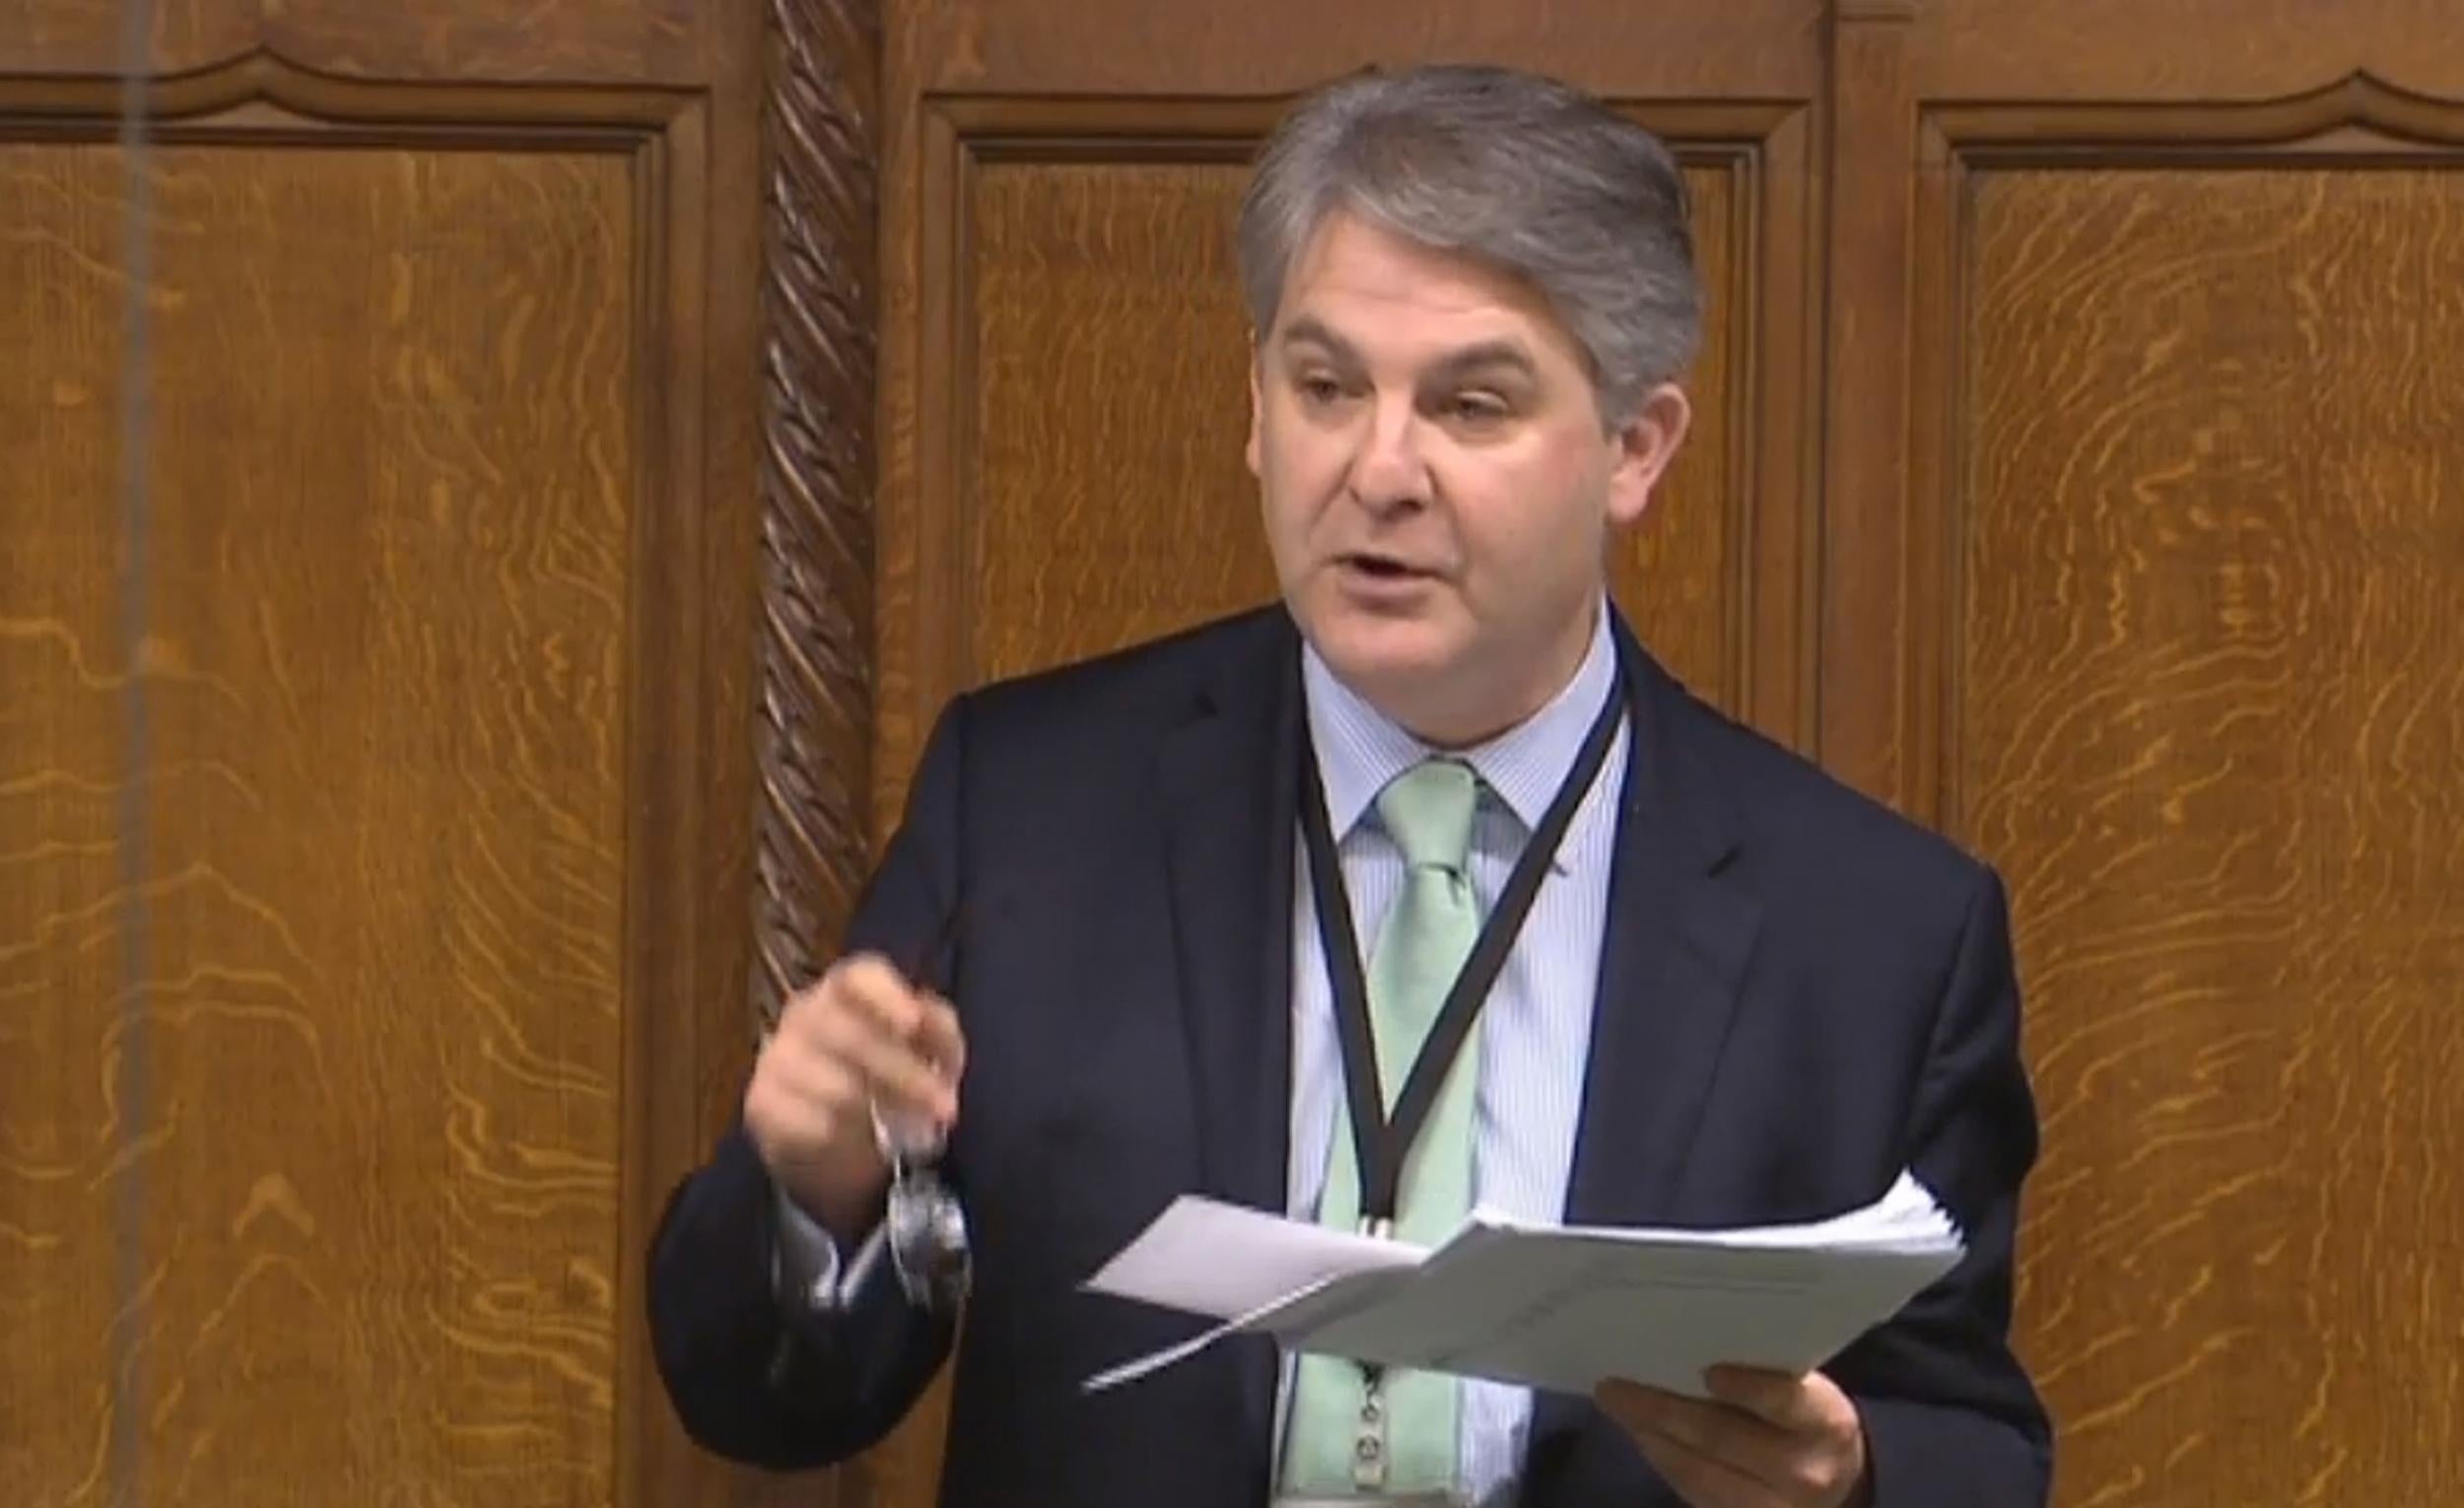 It&apos;s filibuster Friday and without hesitation deviation or repetition in came Philip Davies